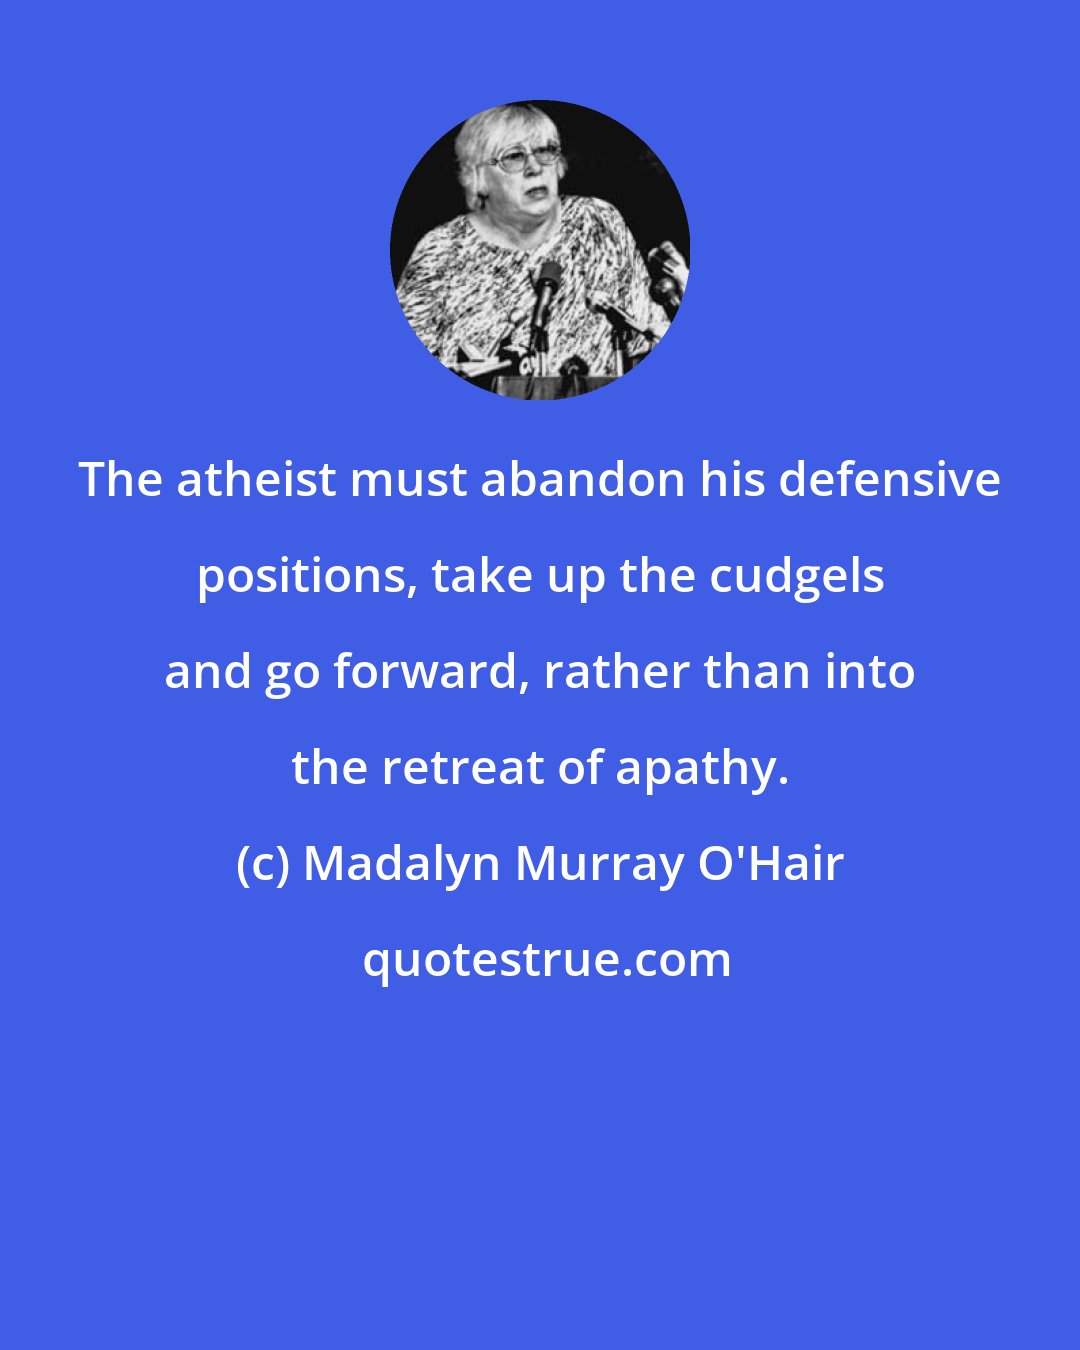 Madalyn Murray O'Hair: The atheist must abandon his defensive positions, take up the cudgels and go forward, rather than into the retreat of apathy.